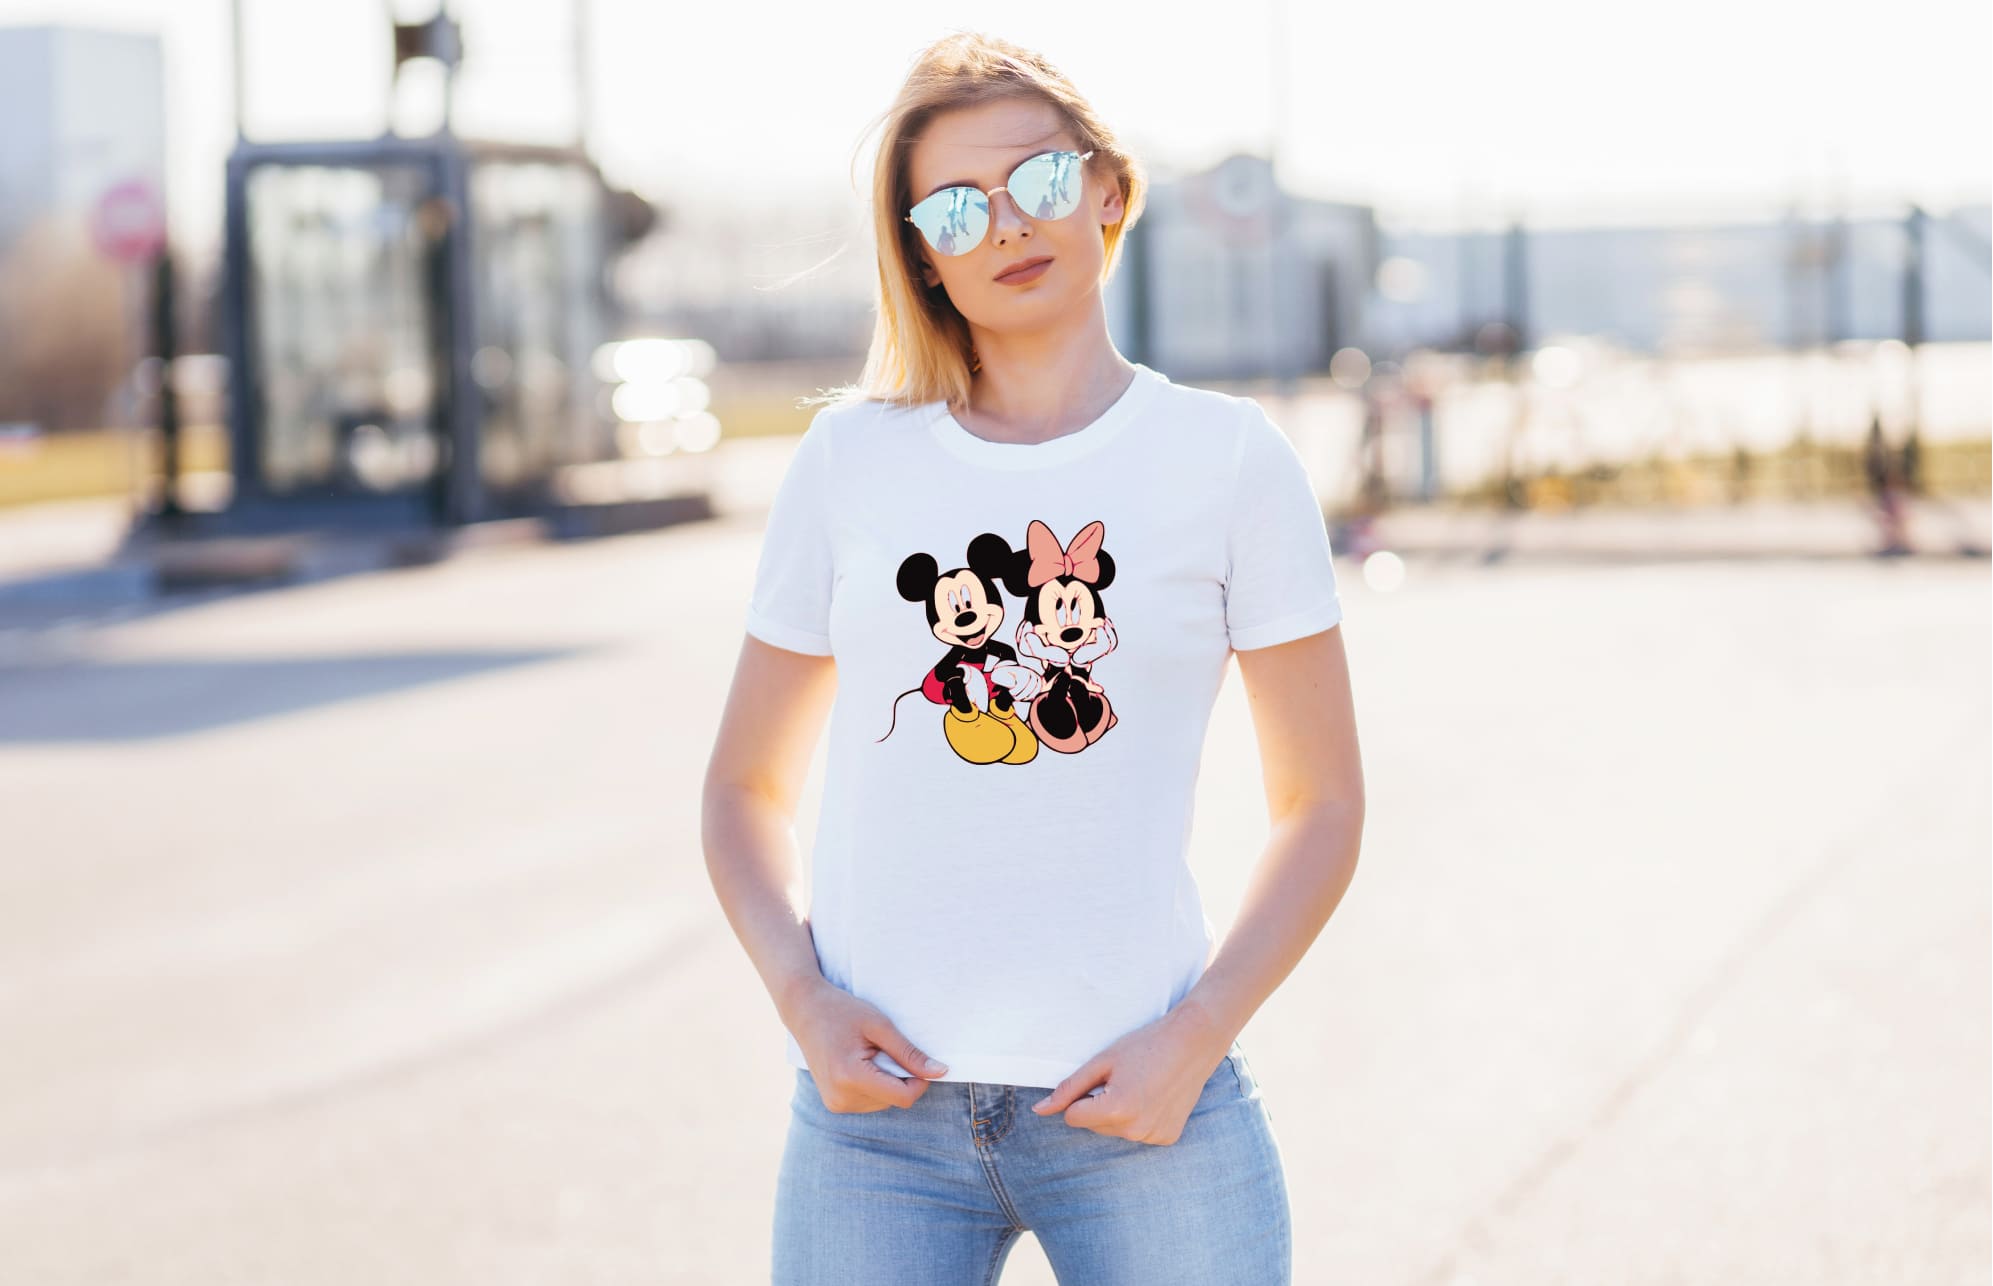 Lovely mickey mouse couple on the t-shirt.